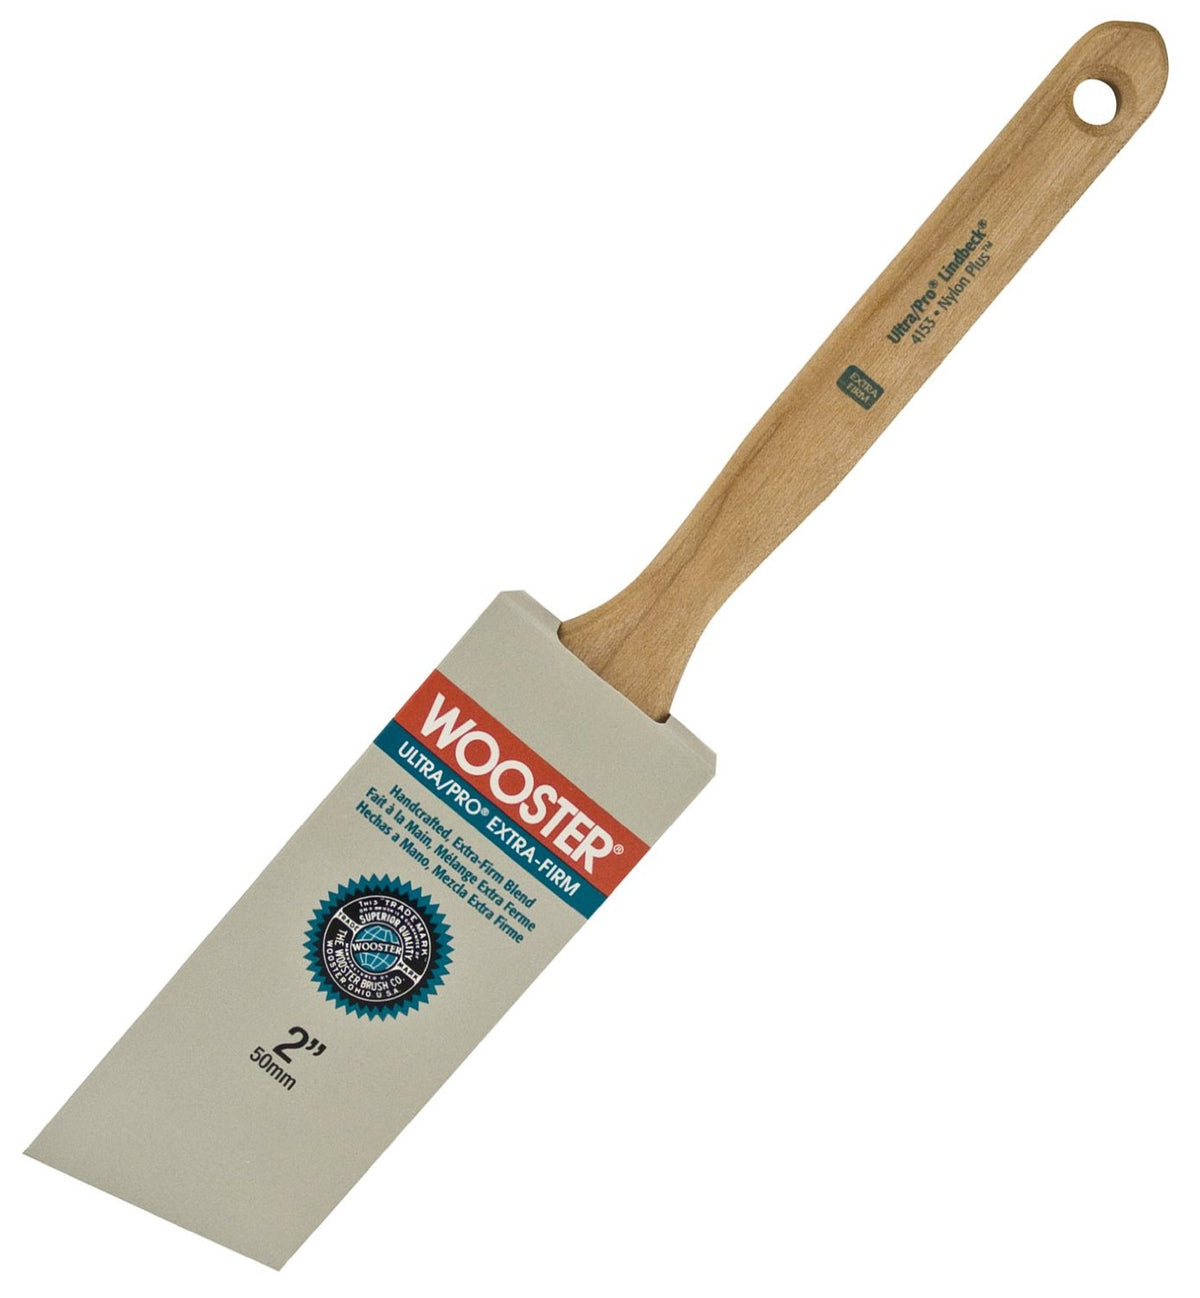 Wooster 4153-2 Ultra/Pro Extra Firm Lindbeck Angle Sash Paint Brush, 2"